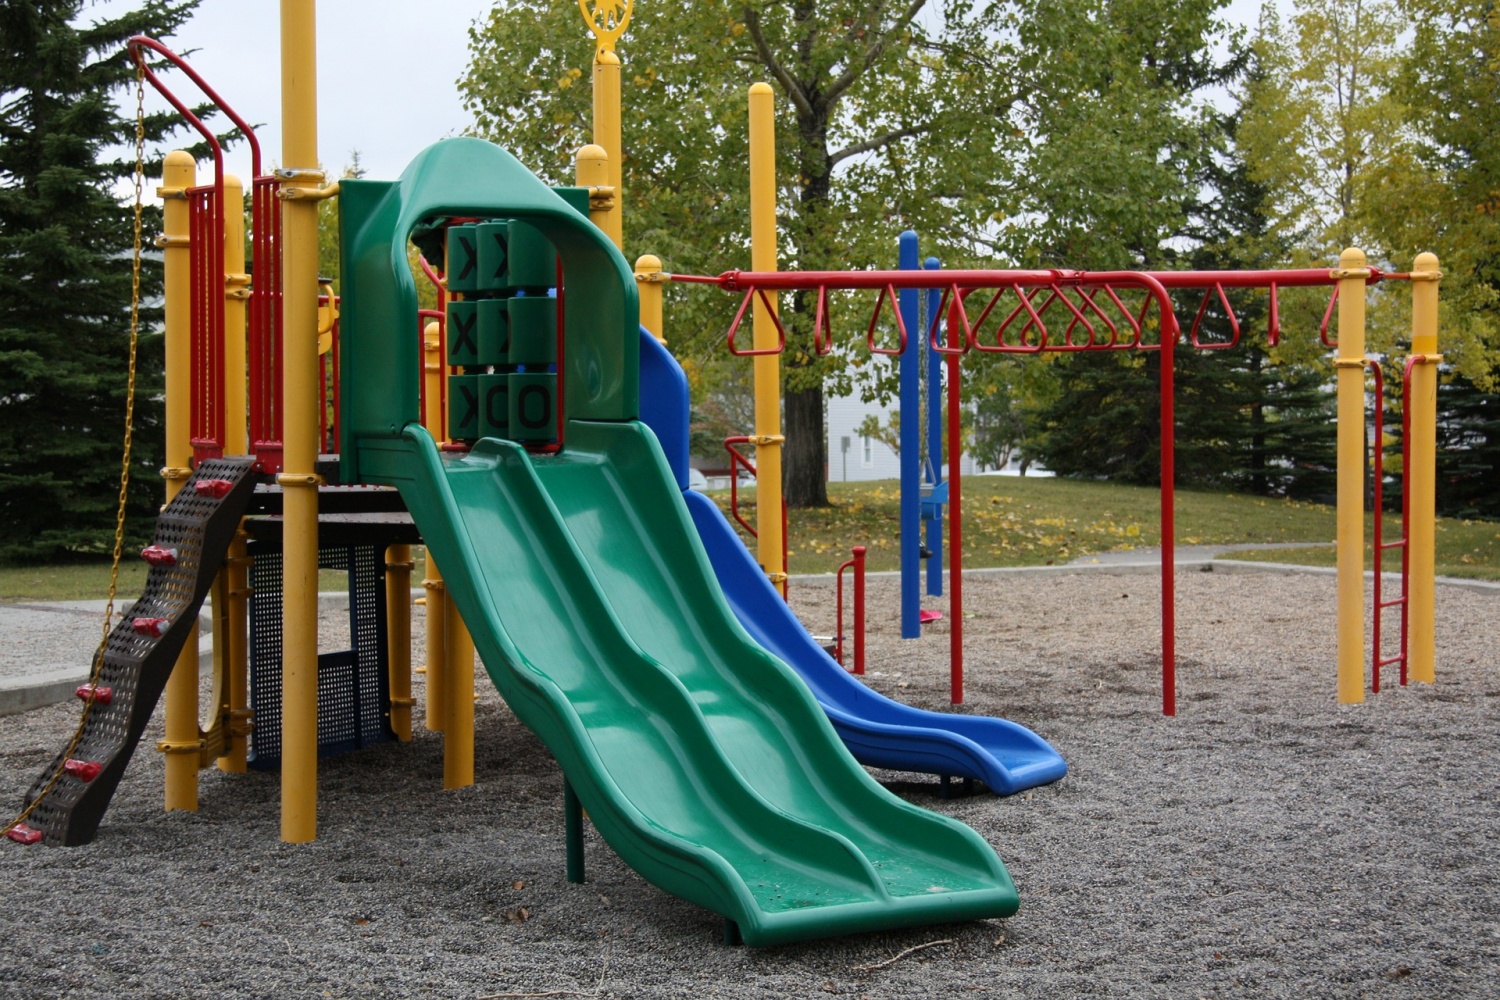 Why Should Parents Not Join the Child on the Slide?